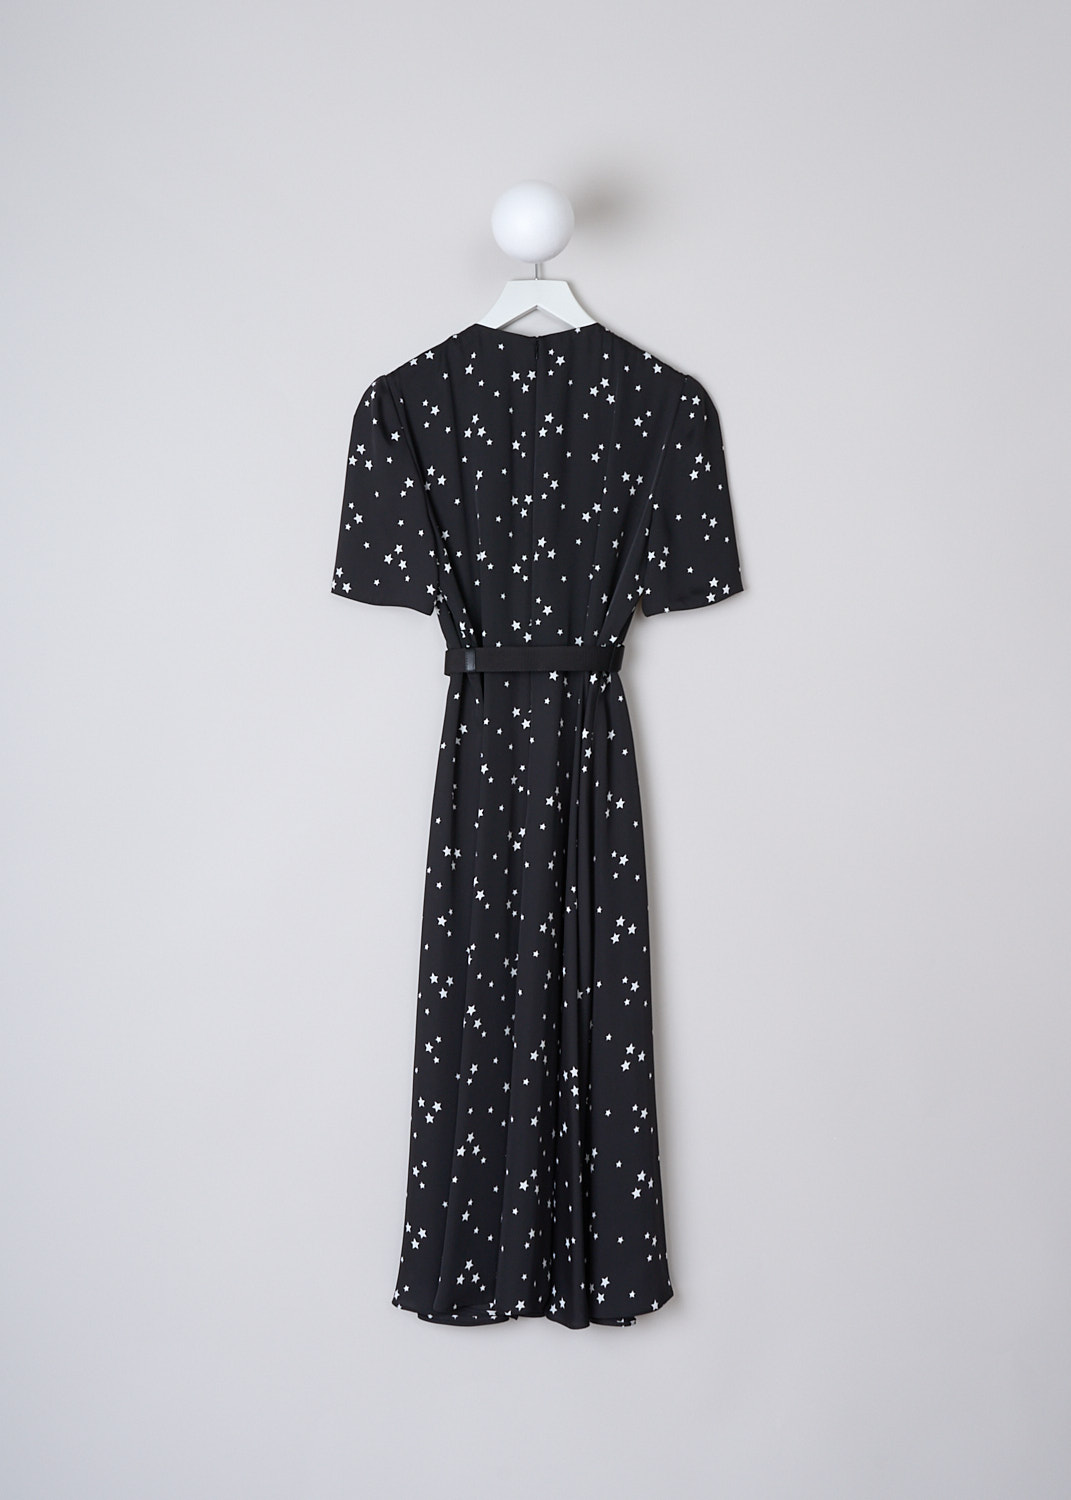 PRADA, BLACK MIDI DRESS WITH WHITE STAR PRINT, TWILL_FLUIDO_ST_P3D13H_1YH8_F057Z_NERO_AVORIO, Black, White, Print, Back, This black dress with a white all-over star print has a high round neckline and short sleeves. The dress has a knife-pleated bodice and is divided from the skirt through a black cavas belt with a rectangular silver-tone belt buckle with the brands logo on it. The dress has a flared pleated midi skirt. In the back, a concealed centre zip functions as the closure.   
